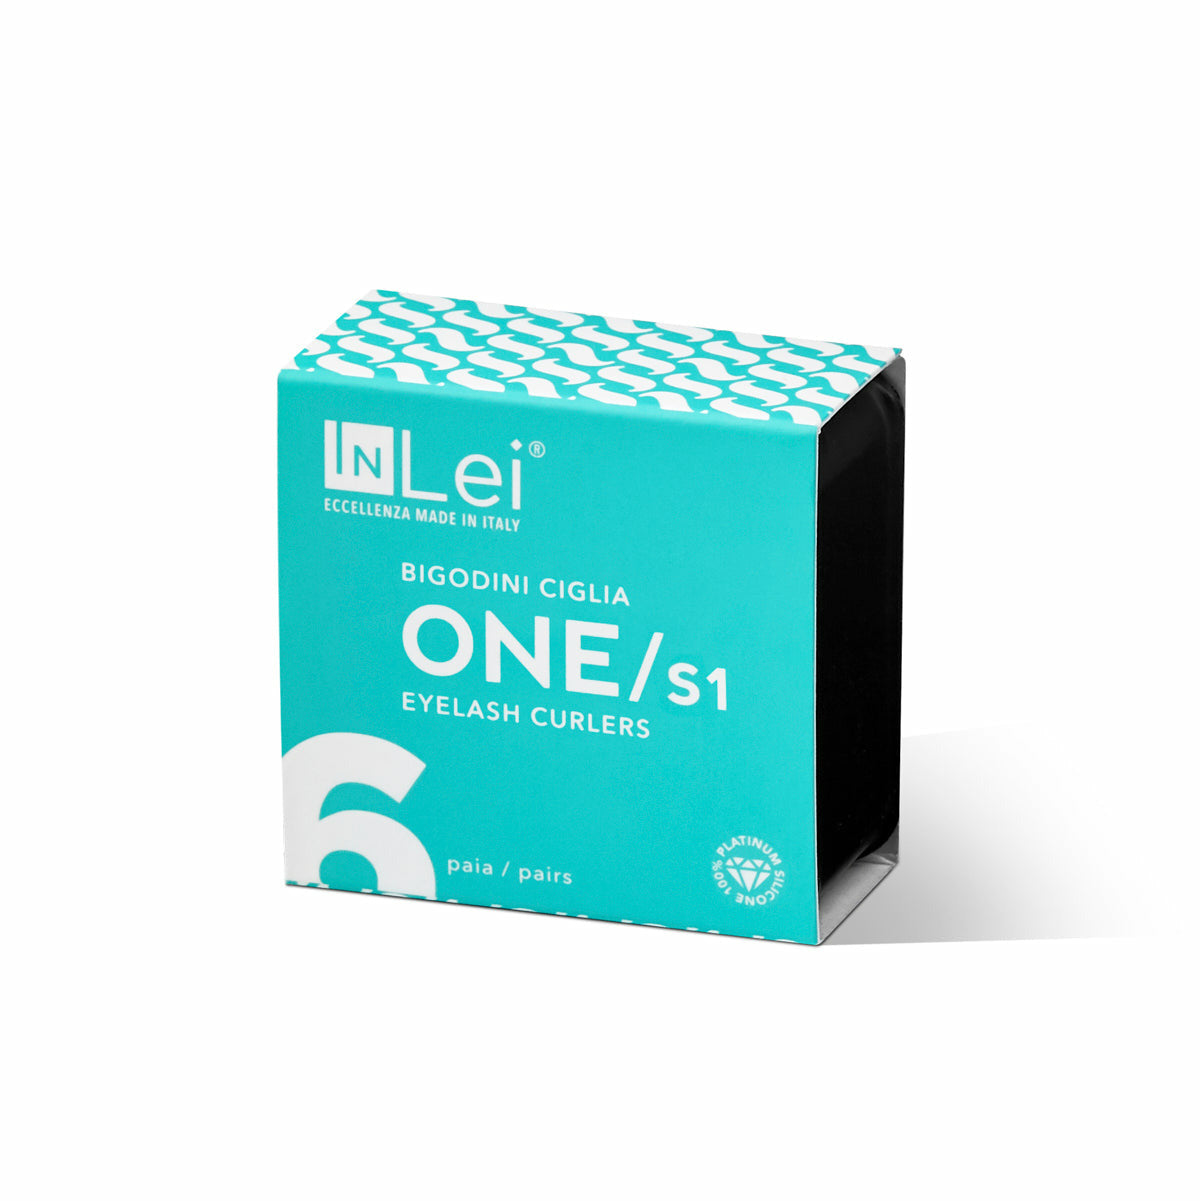 InLei® "ONE" - Silicone Shields Size S1